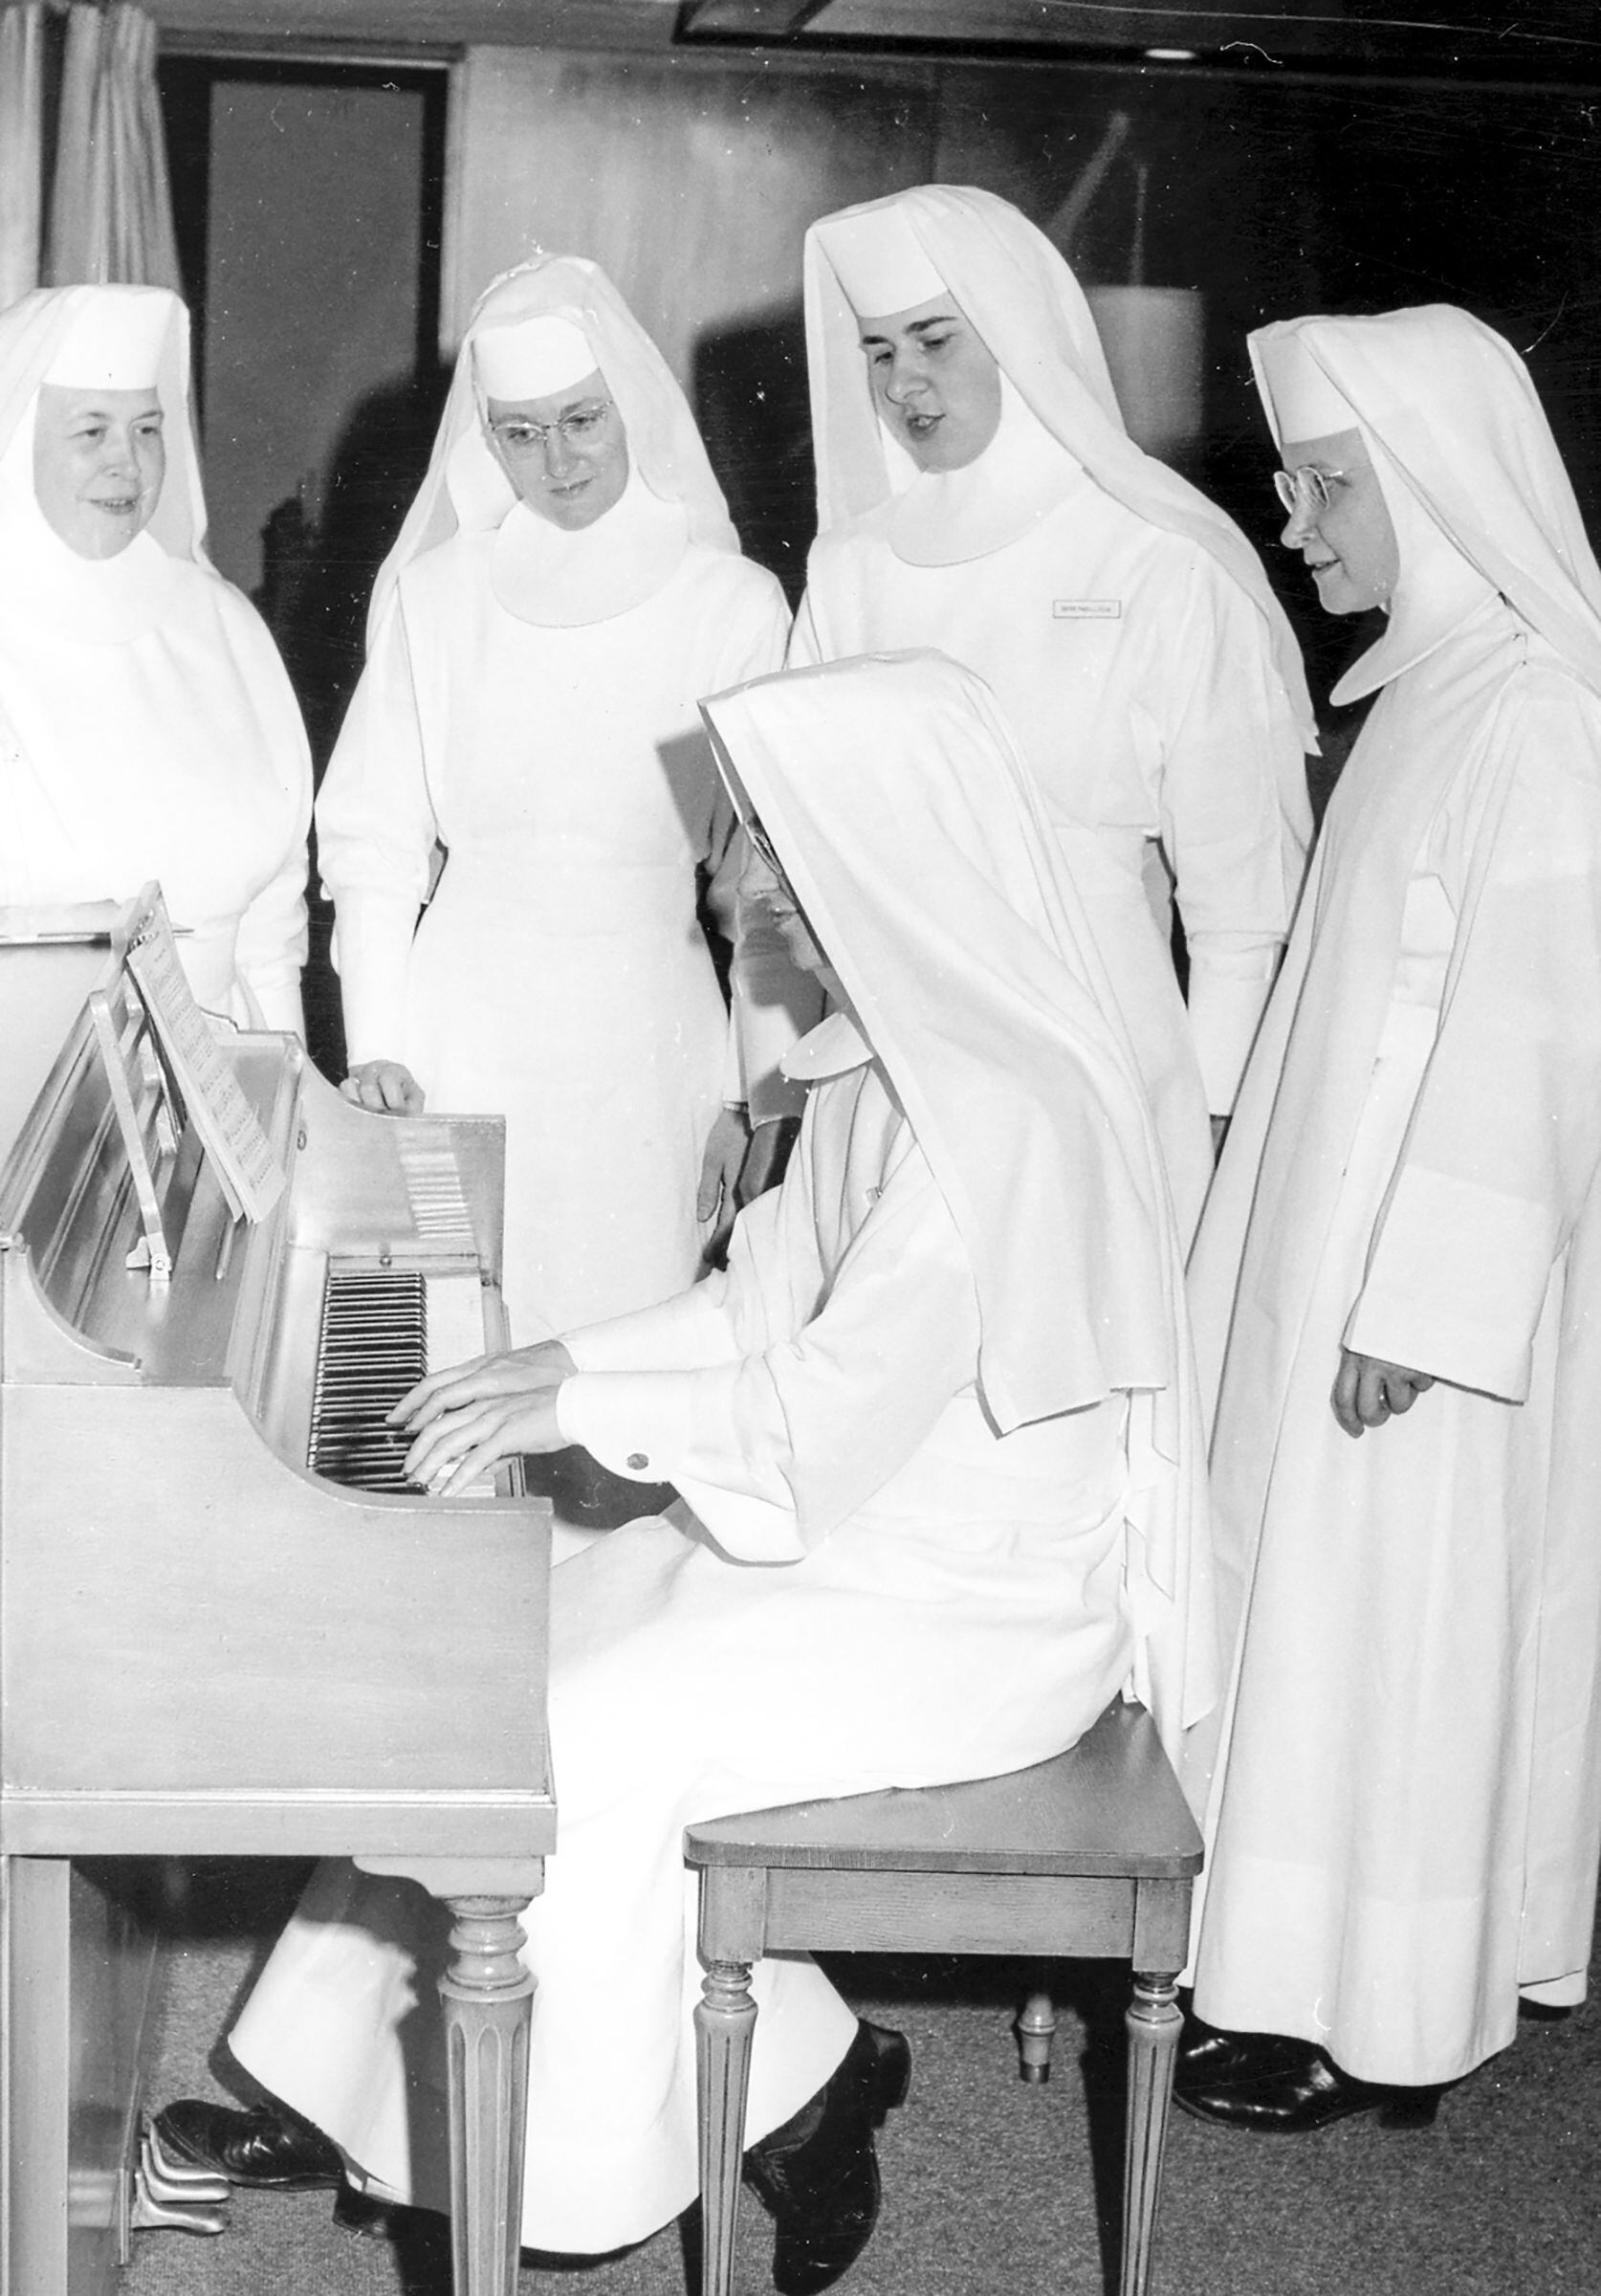 (Sisters of the Order of St. Benedict) Taking a break from their medical responsibilities, sisters at St. Benedict's Hospital in Ogden enjoy a musical interlude in their convent.